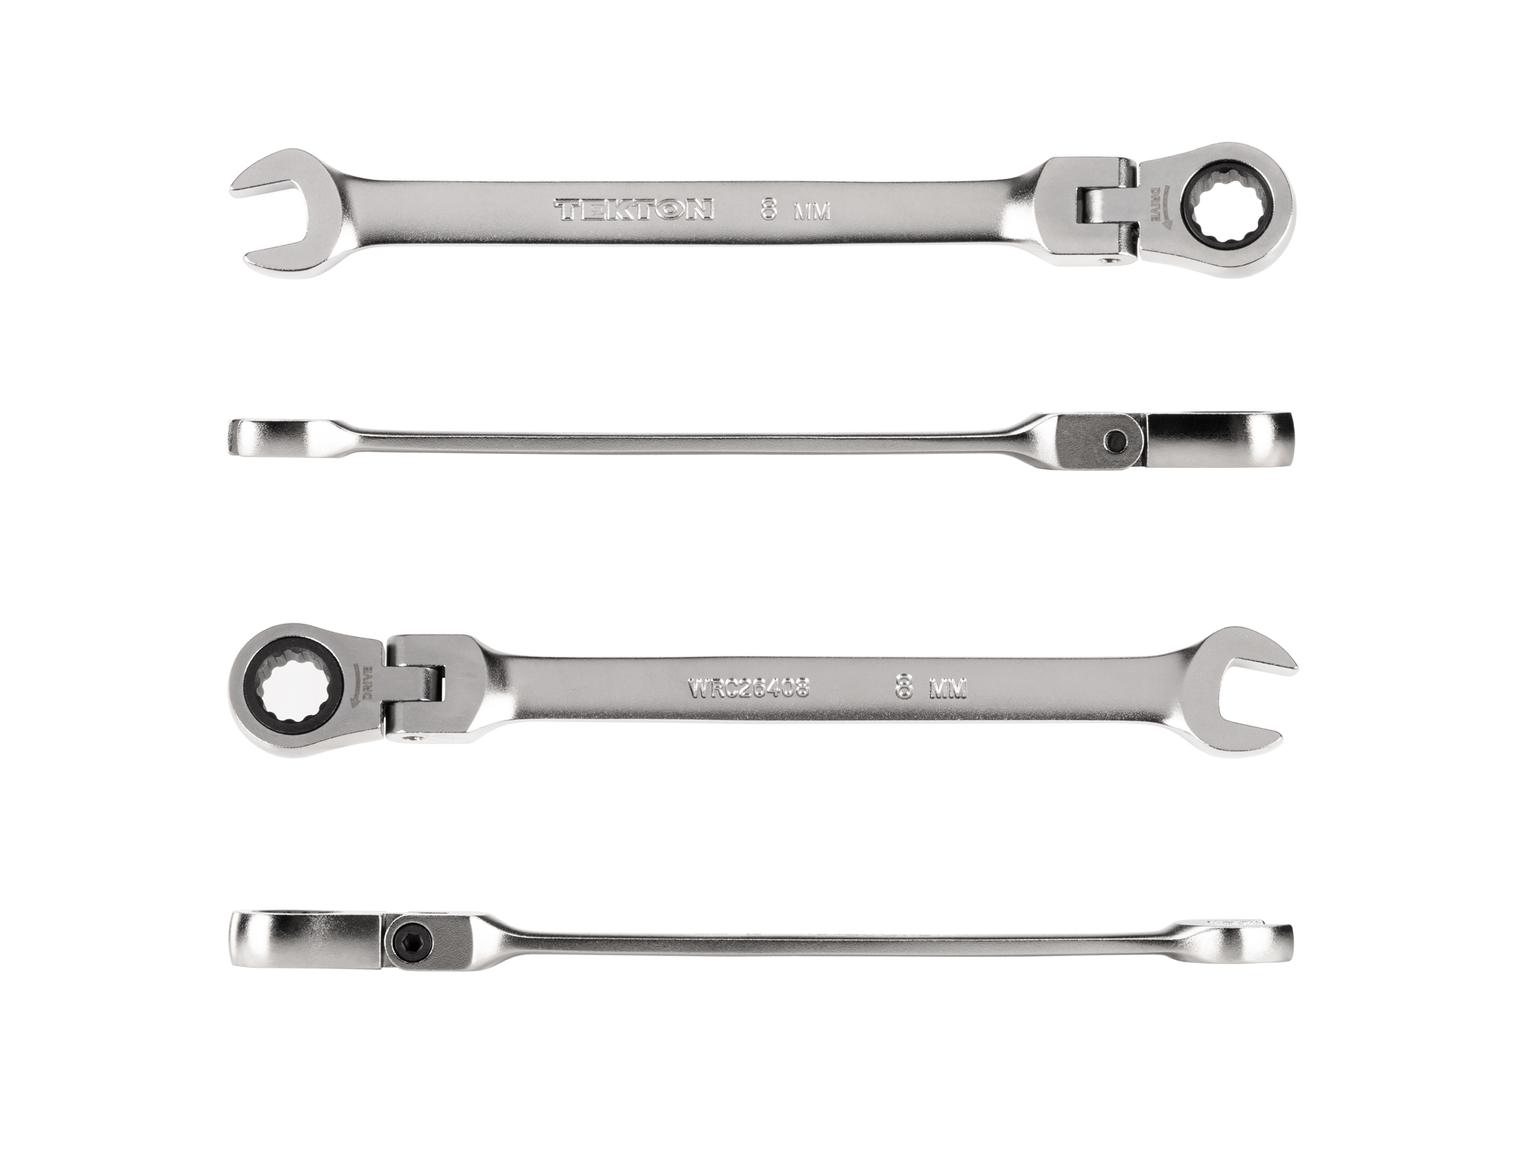 TEKTON WRC26408-T 8 mm Flex Head 12-Point Ratcheting Combination Wrench